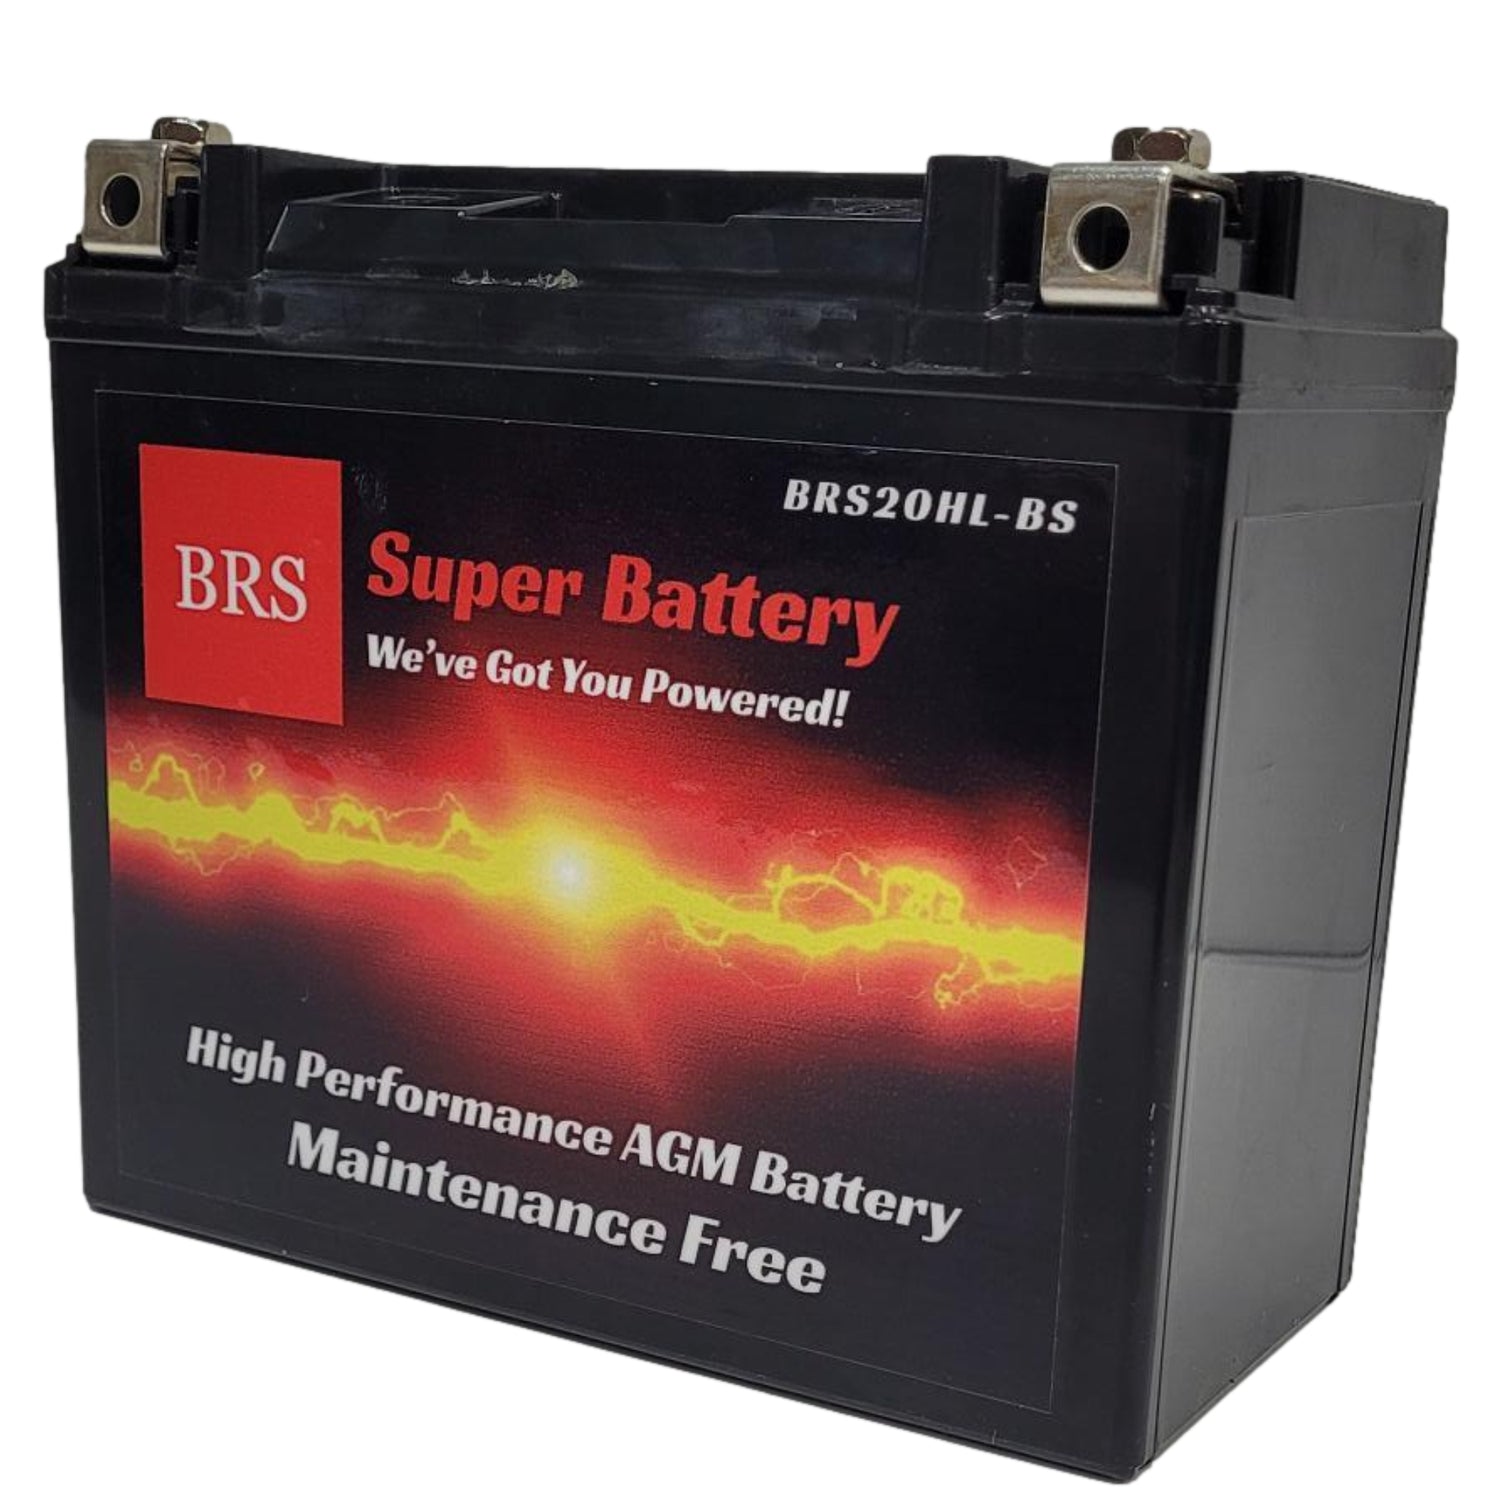 WPX20HL-BS 12v High Performance Sealed AGM PowerSport 2 Year Battery - BRS Super Battery